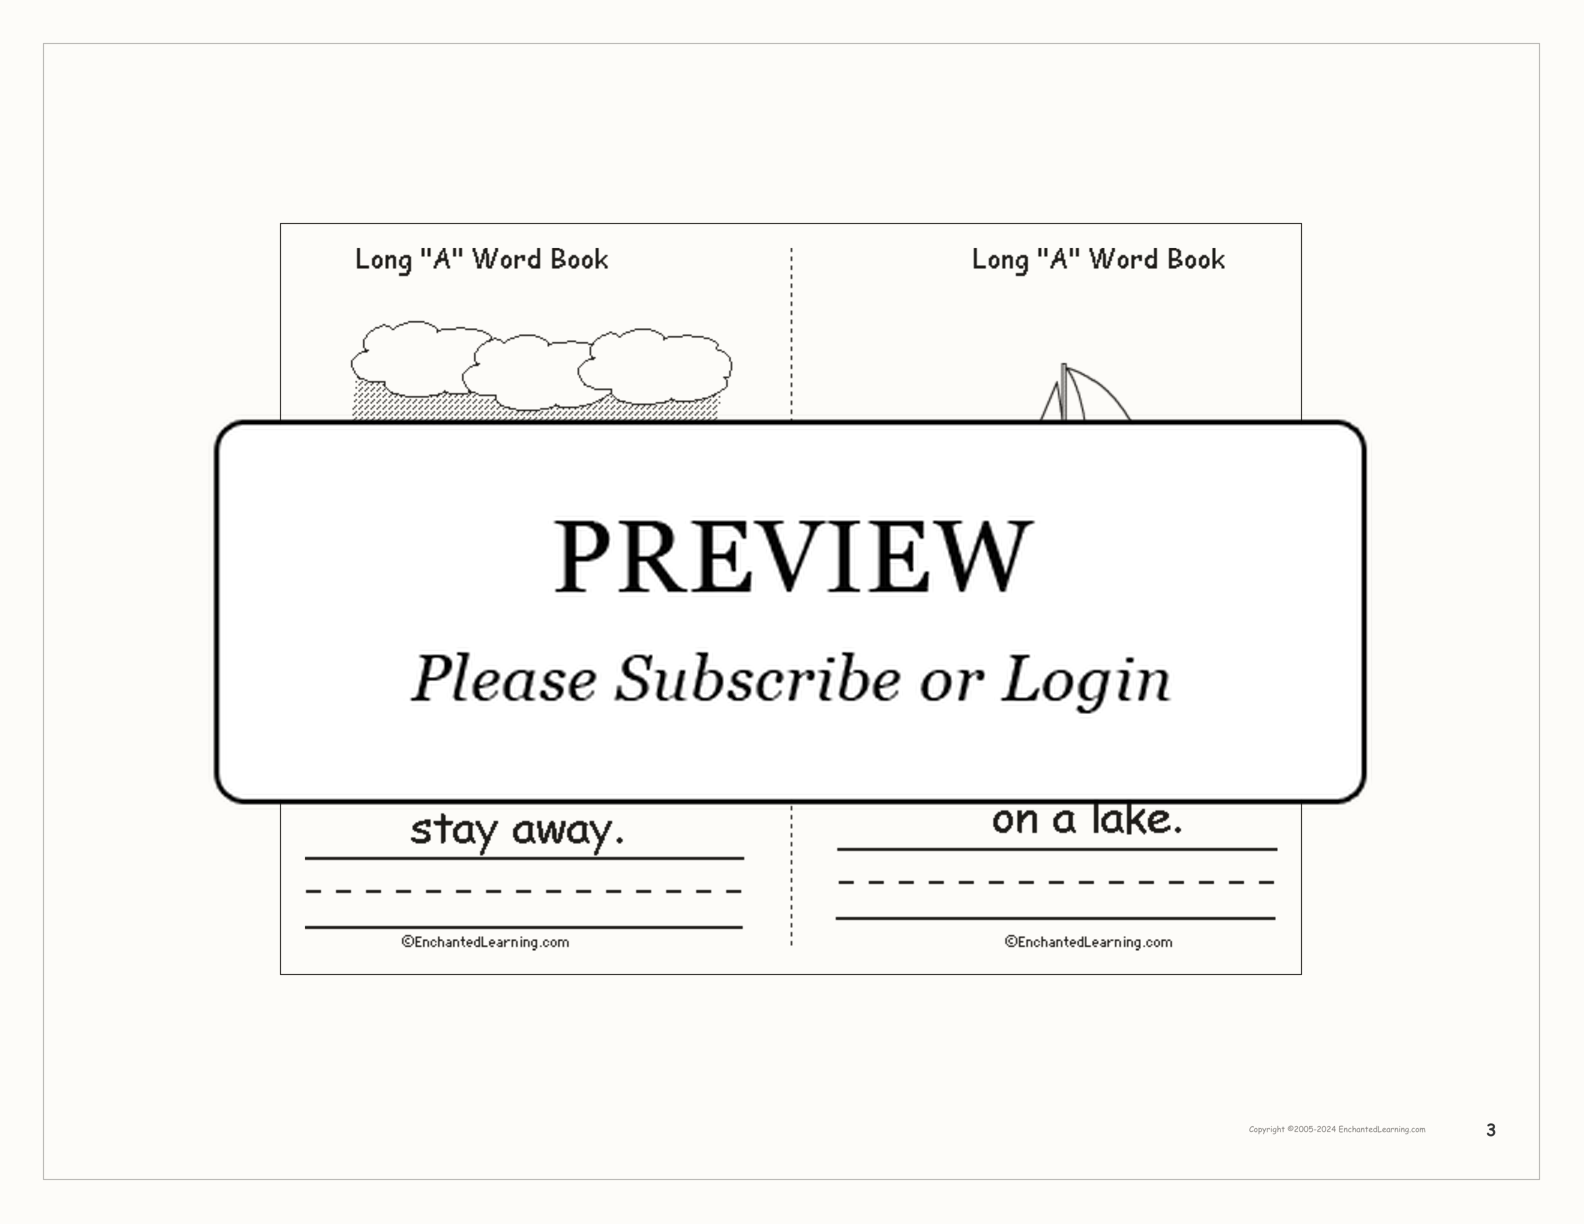 Long 'A' Words Book interactive printout page 3